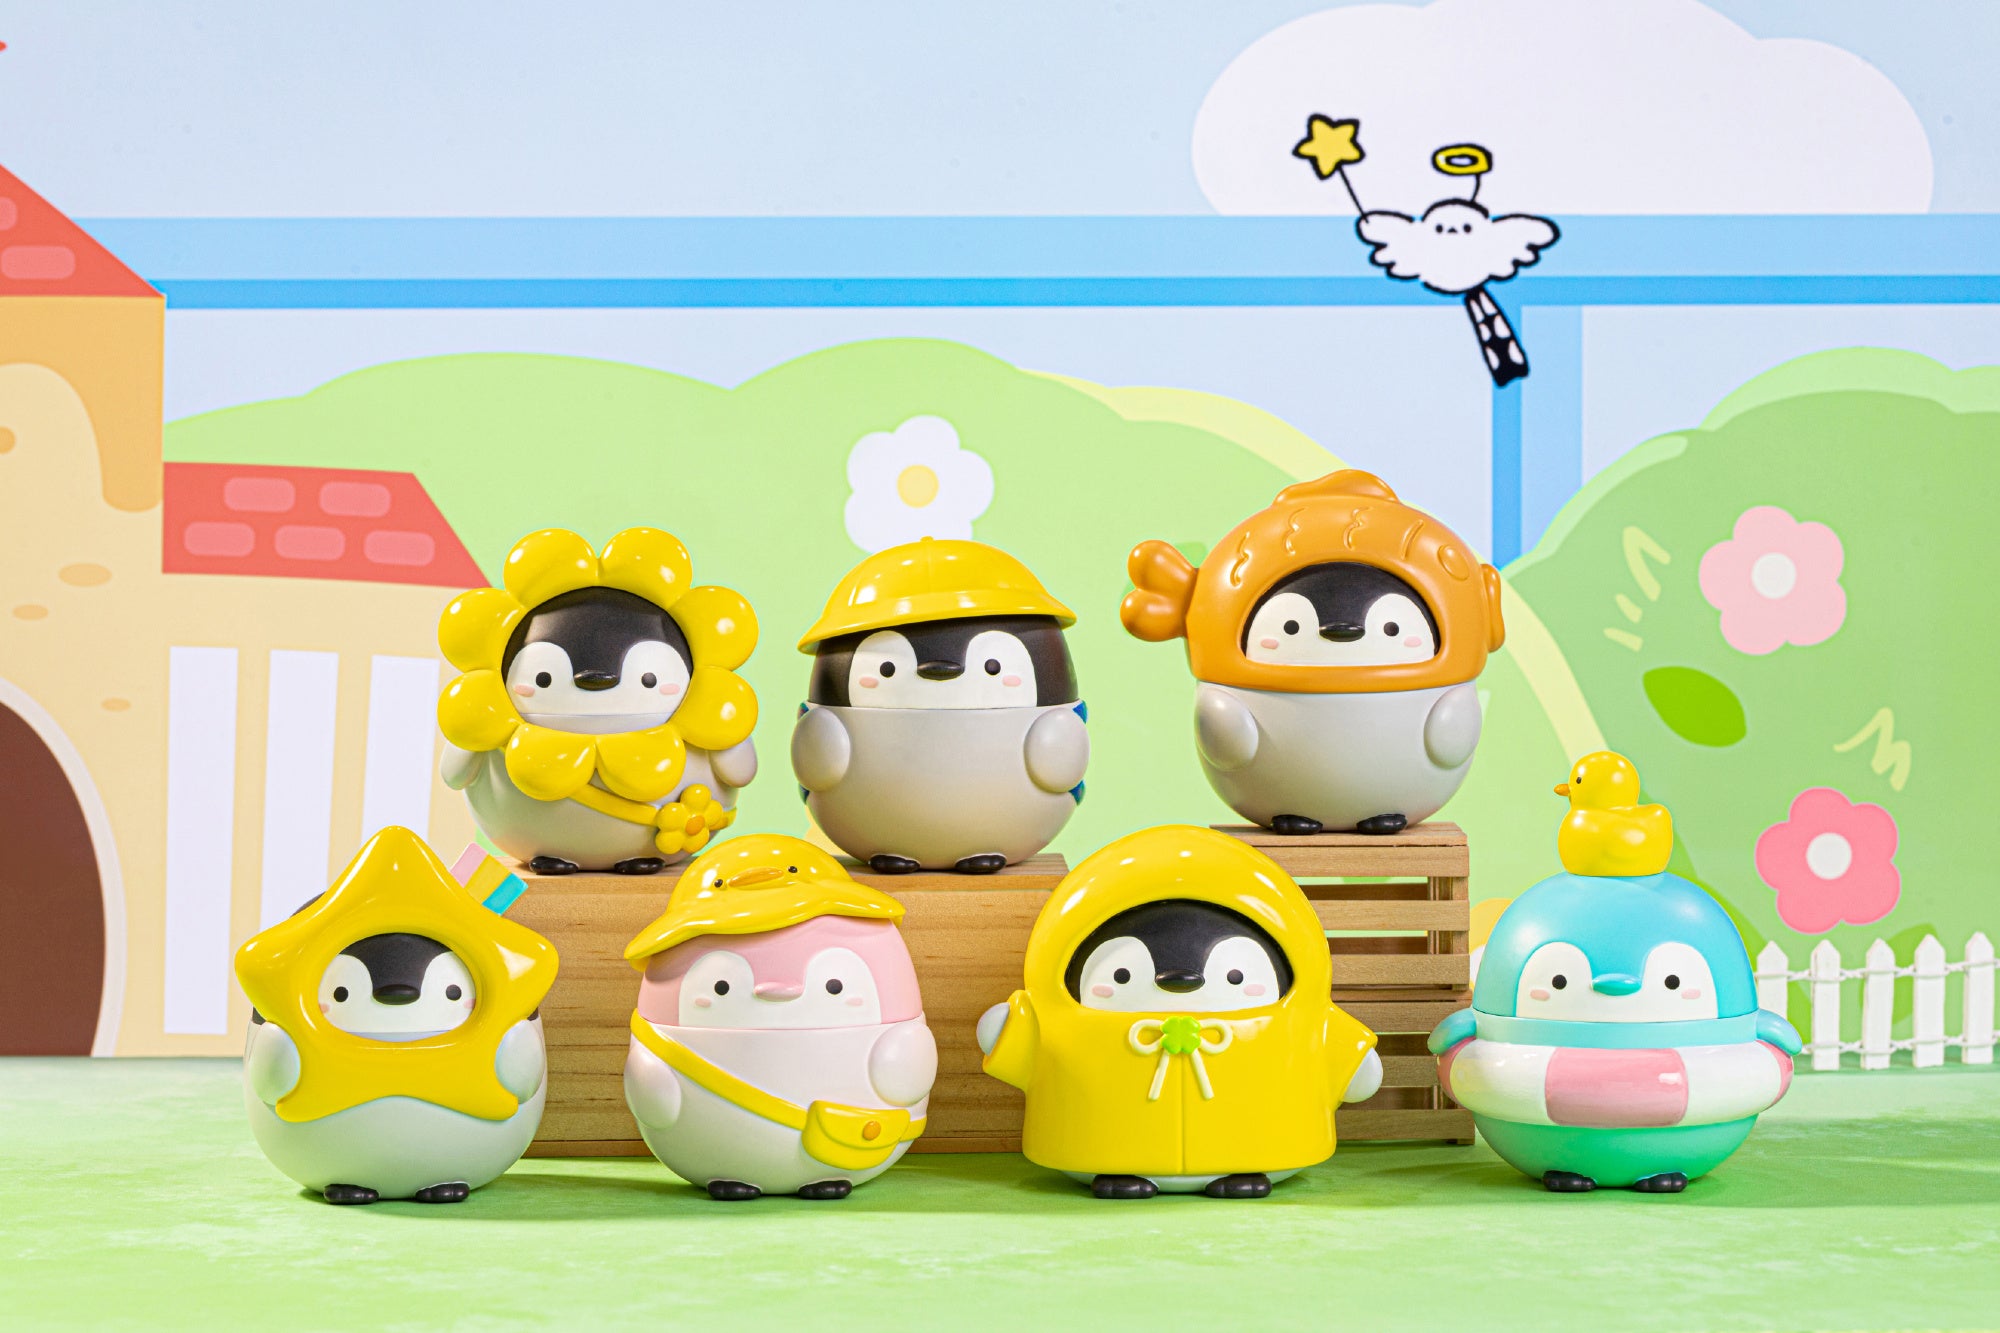 Positive Energy Penguin - Gosling Garden Blind Box Series: Toy penguins with unique designs, including a hard hat and a rubber duck.